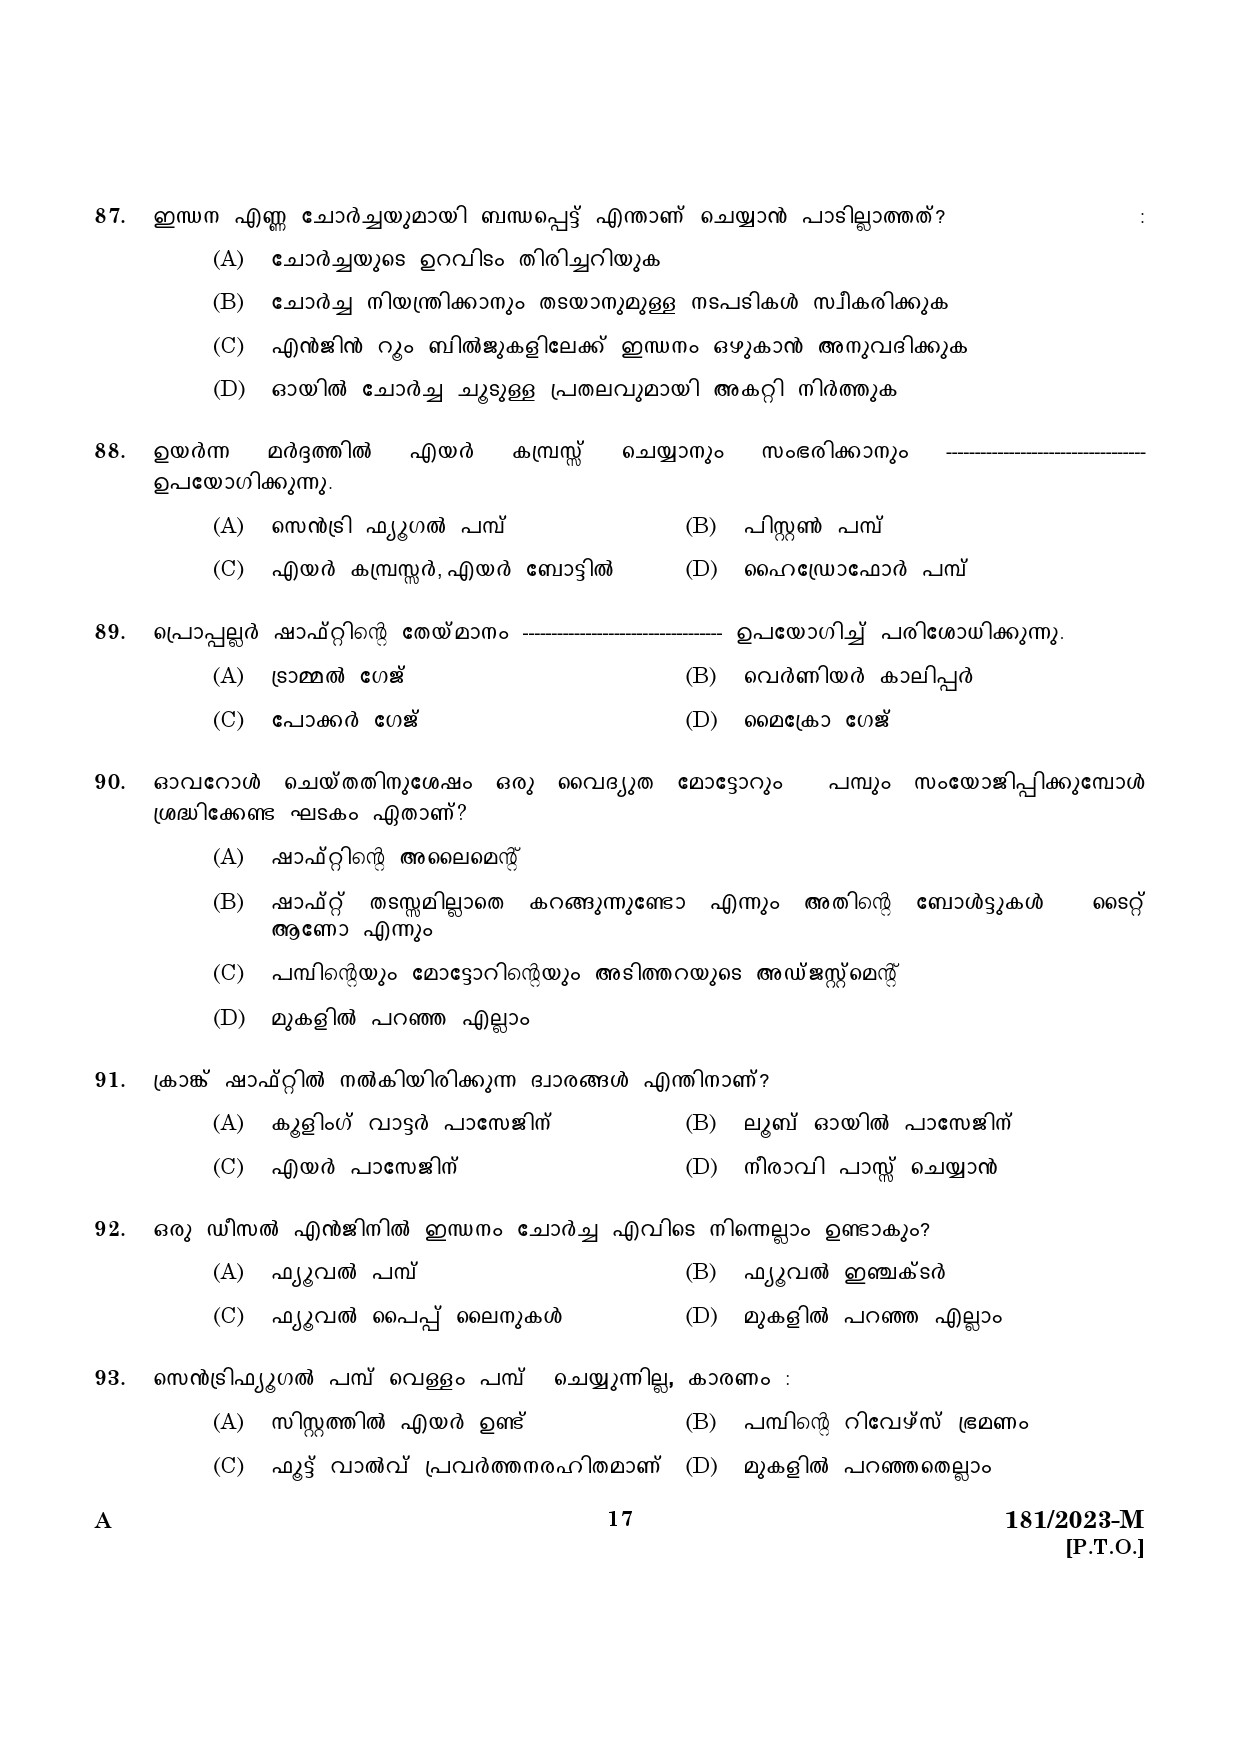 KPSC Forest Boat Driver Malayalam Exam 2023 Code 1812023 M 15